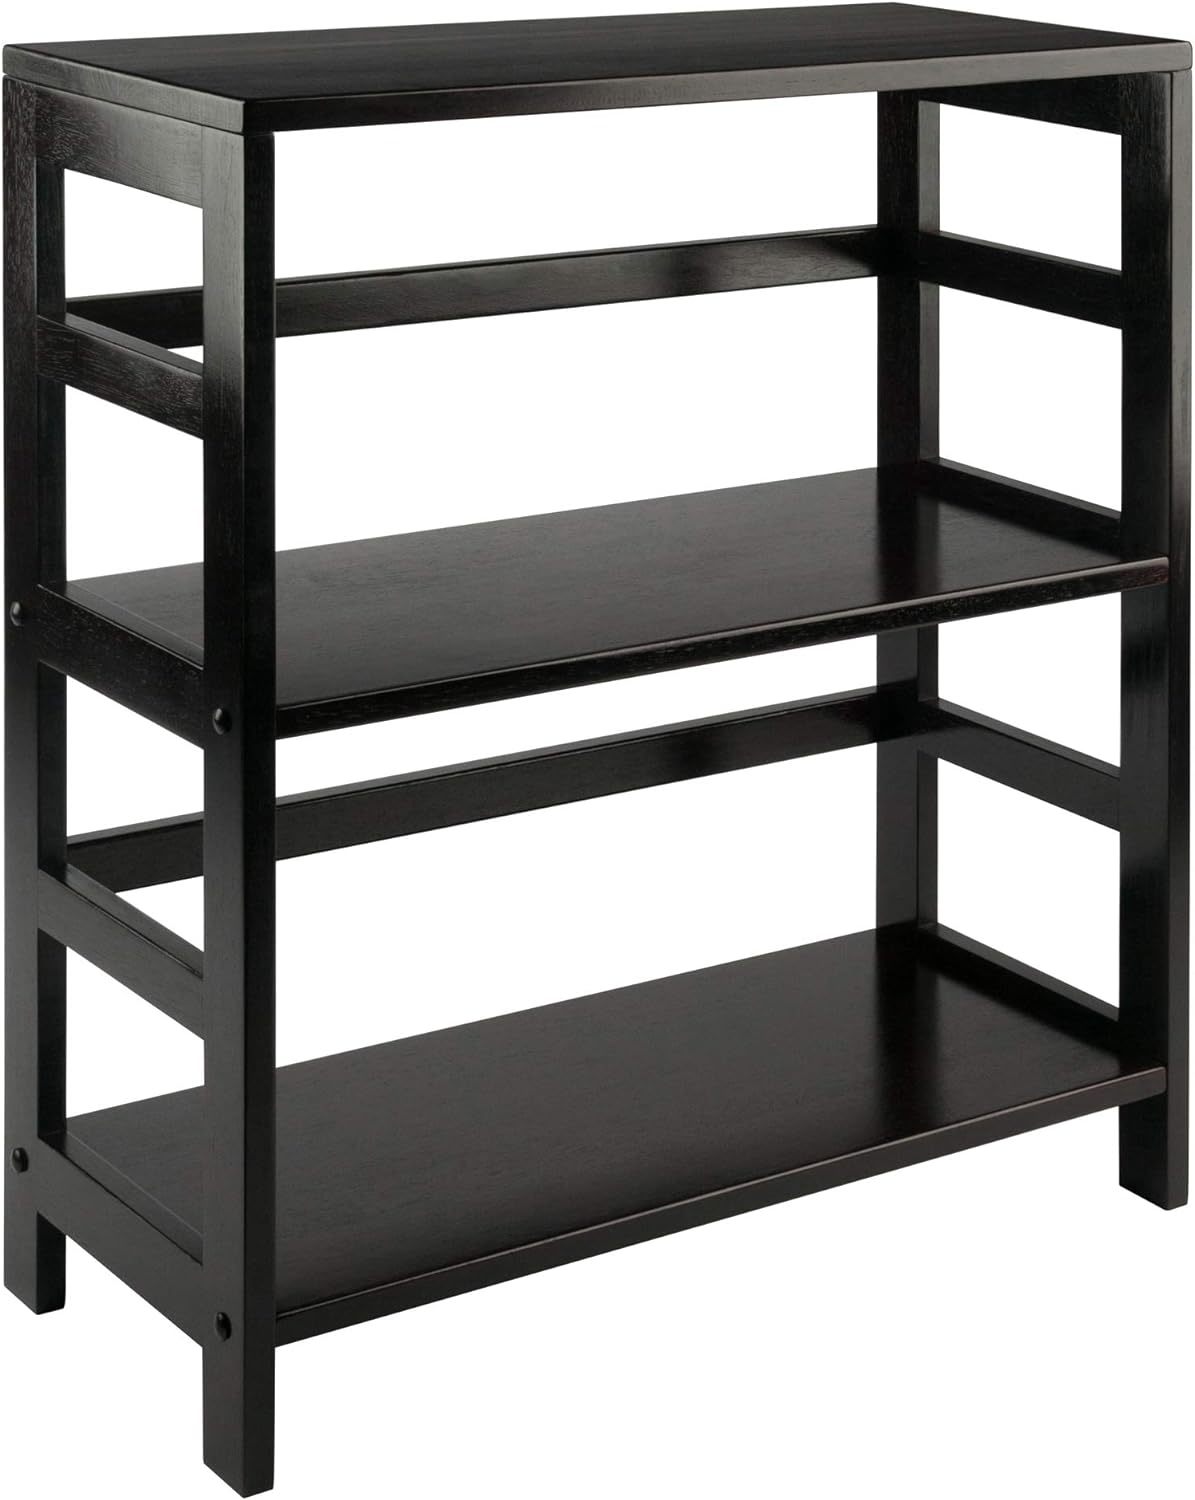 Small And Large Shelves, Espresso, Winsome Wood Leo Model. - $64.94